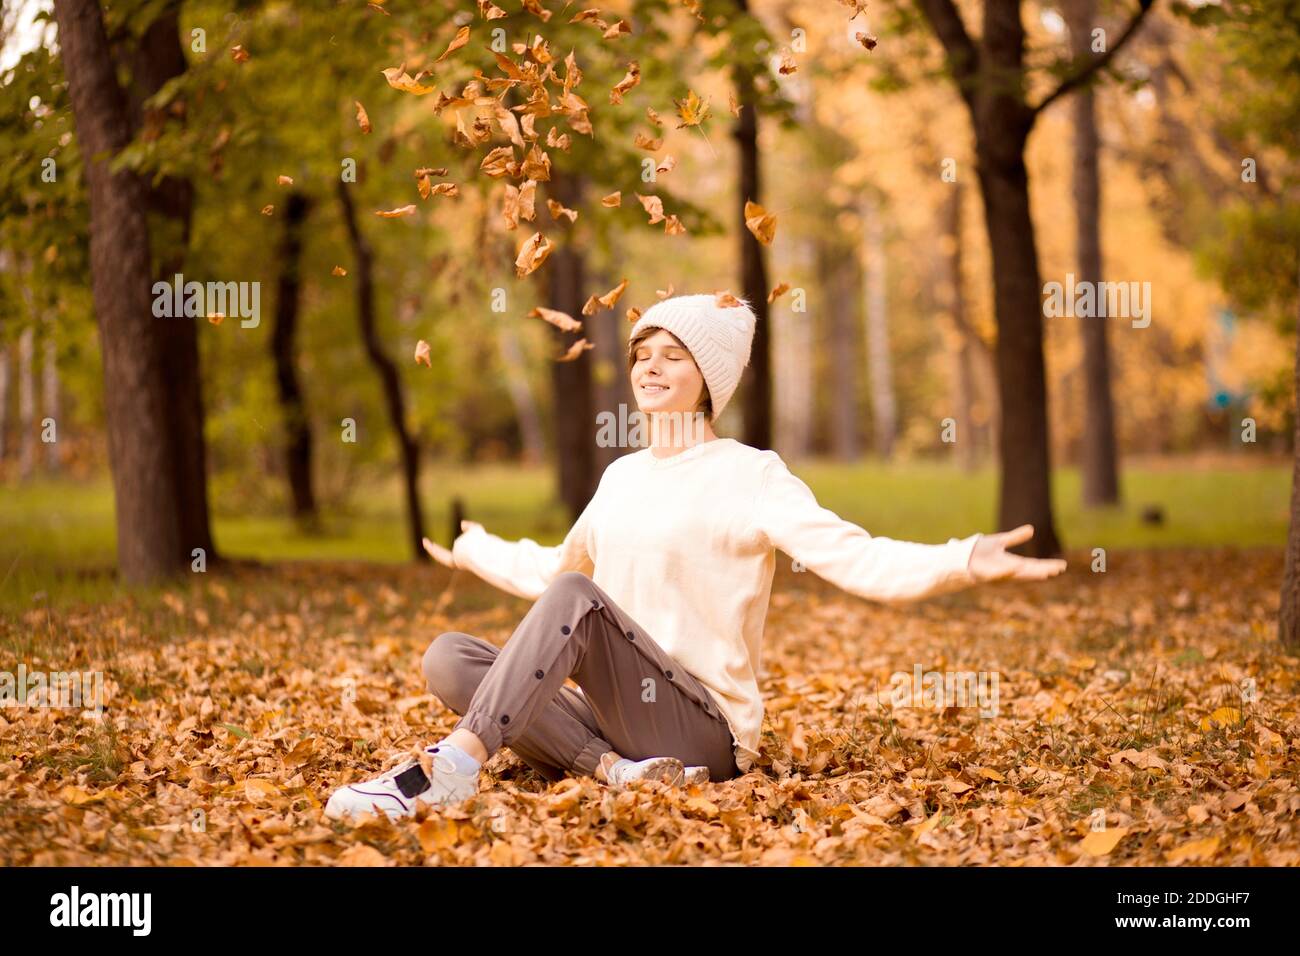 Smiling happy teen girl portrait in white hat throws up leaves in autumn park. Stock Photo